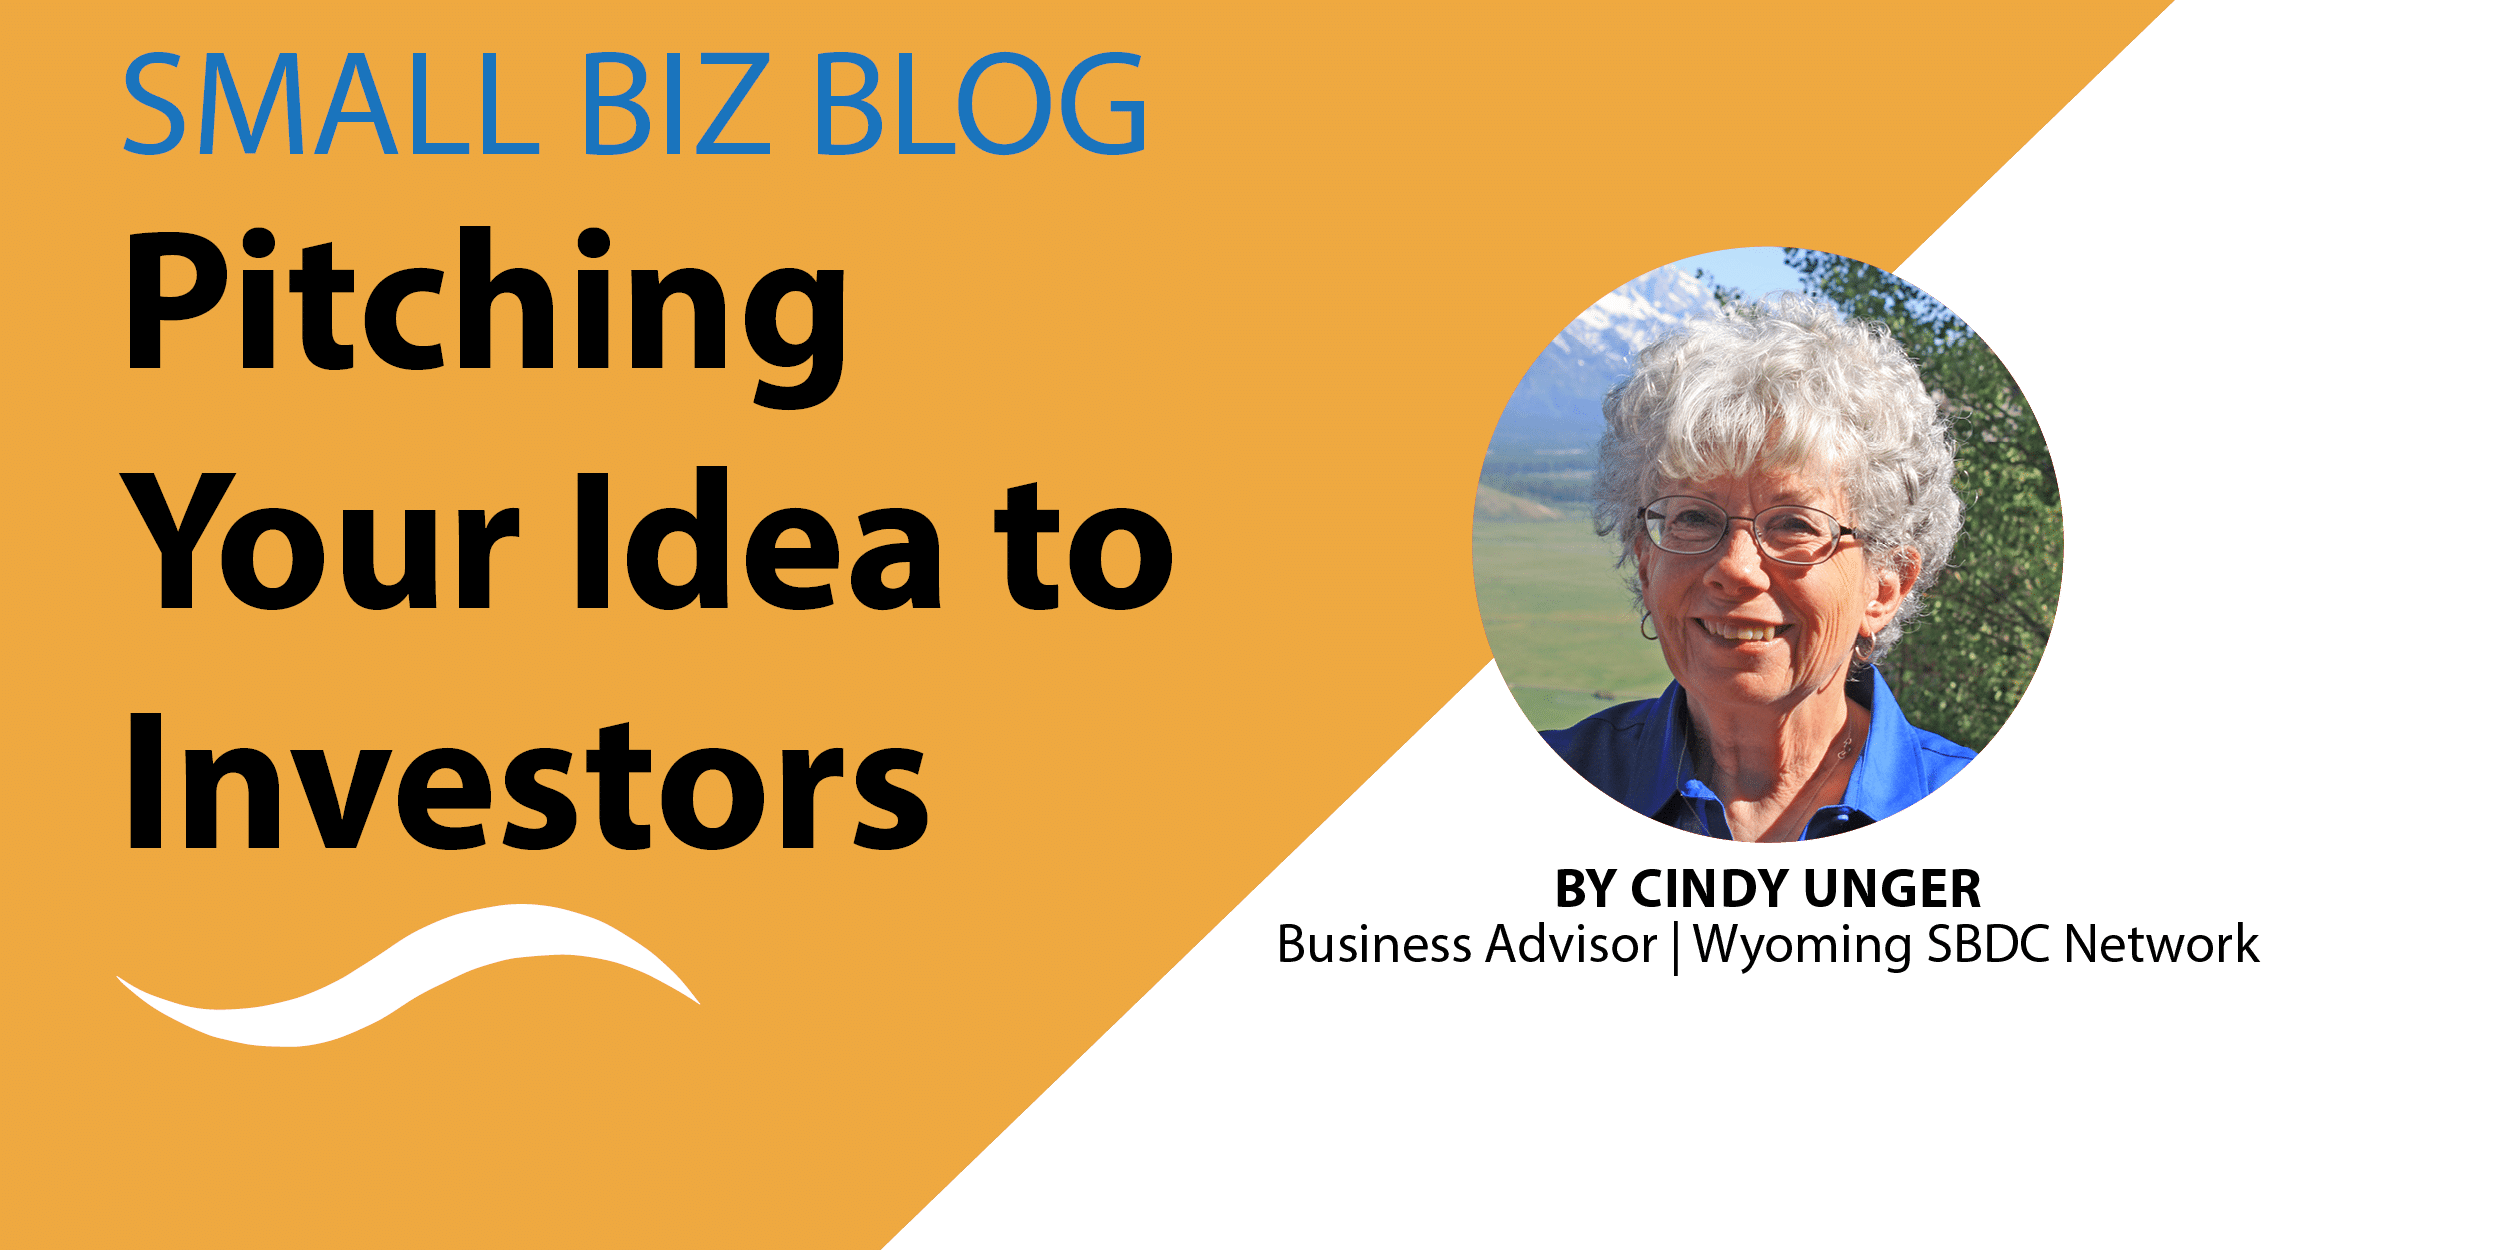 How to pitch an idea to potential investors